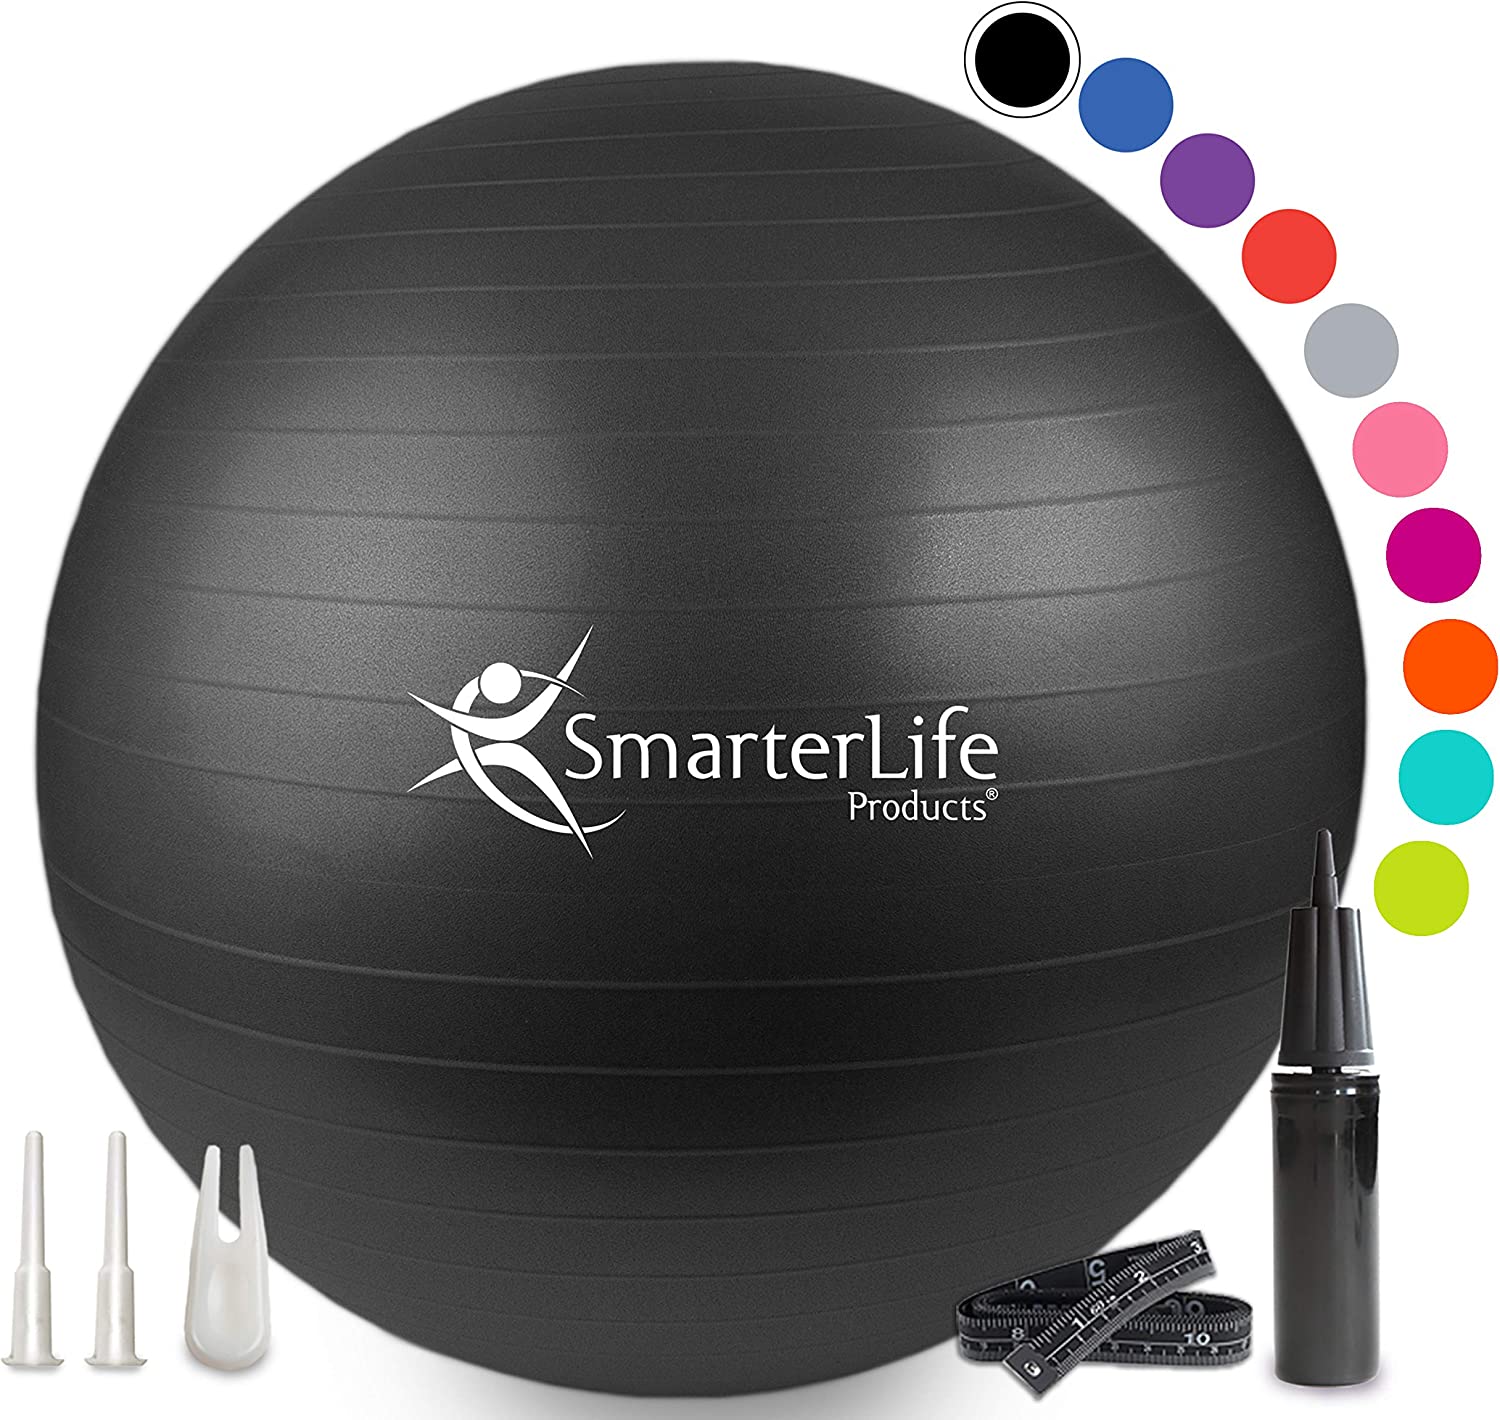 SmarterLife Products Latex-Free Anti-Burst Ball Desk Office Chair